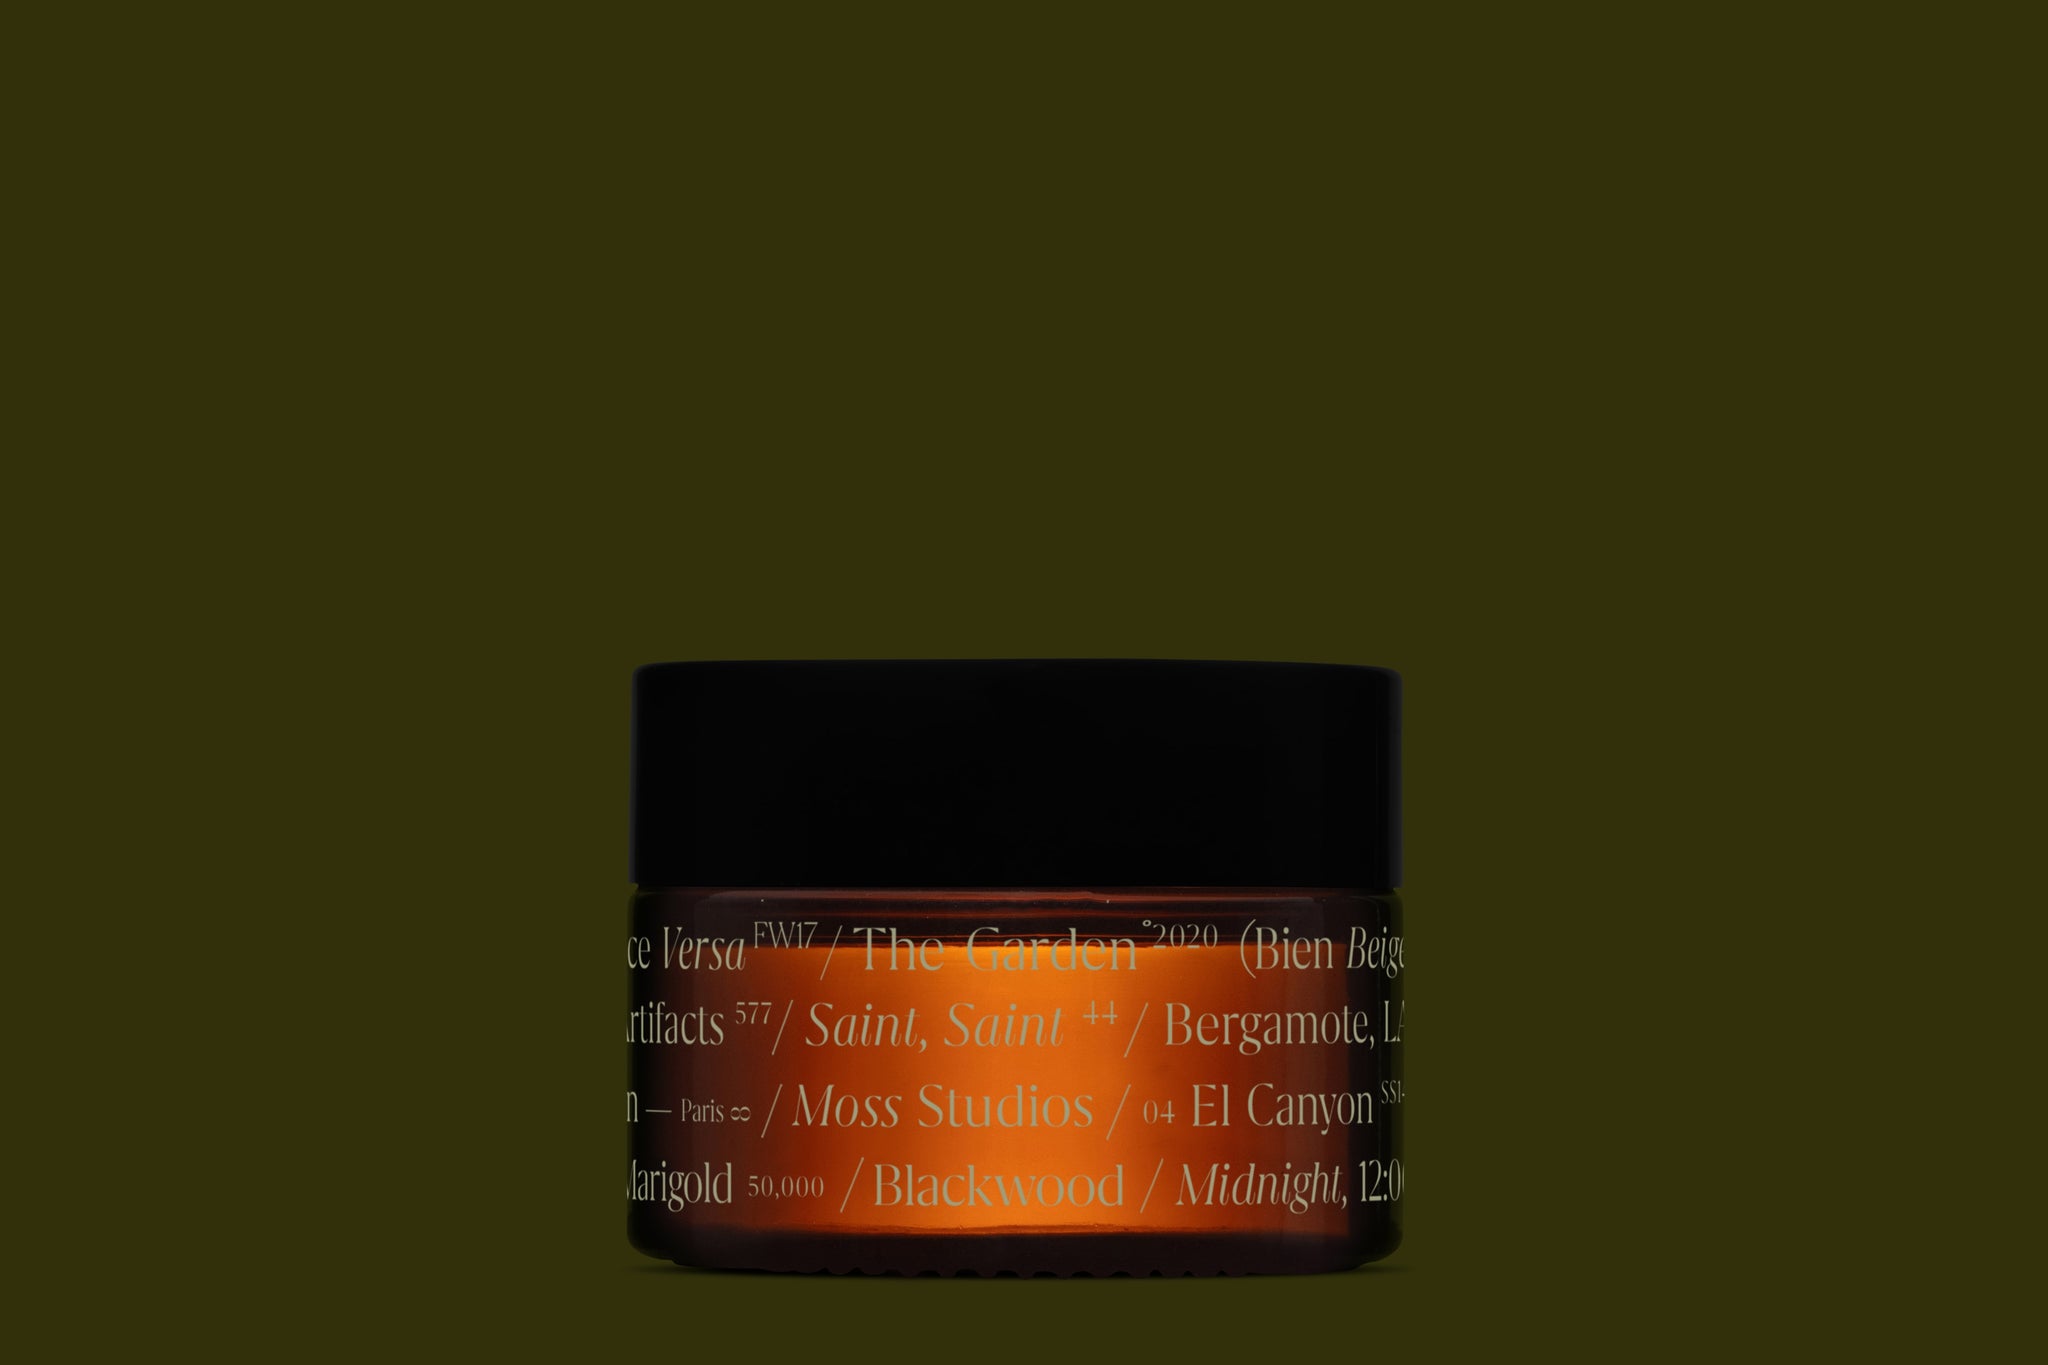 Amber Cosmetic Container Mockup - Copal Studio Packaging Mockups For Designers